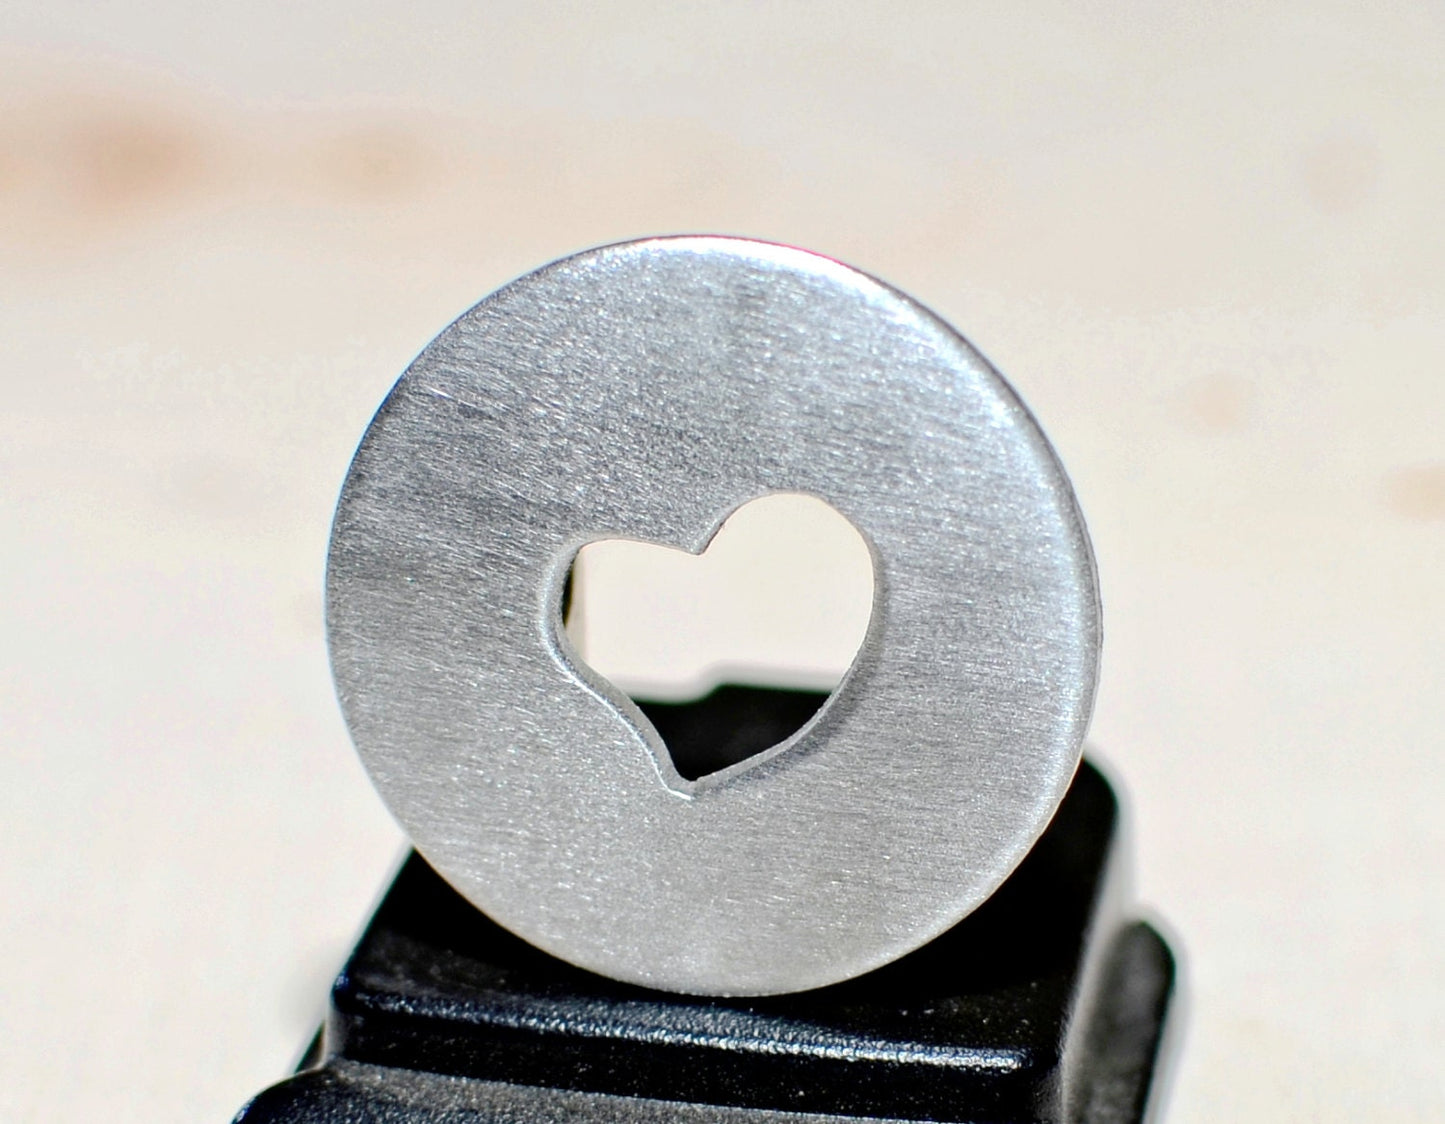 Golf ball marker with a heart cut out